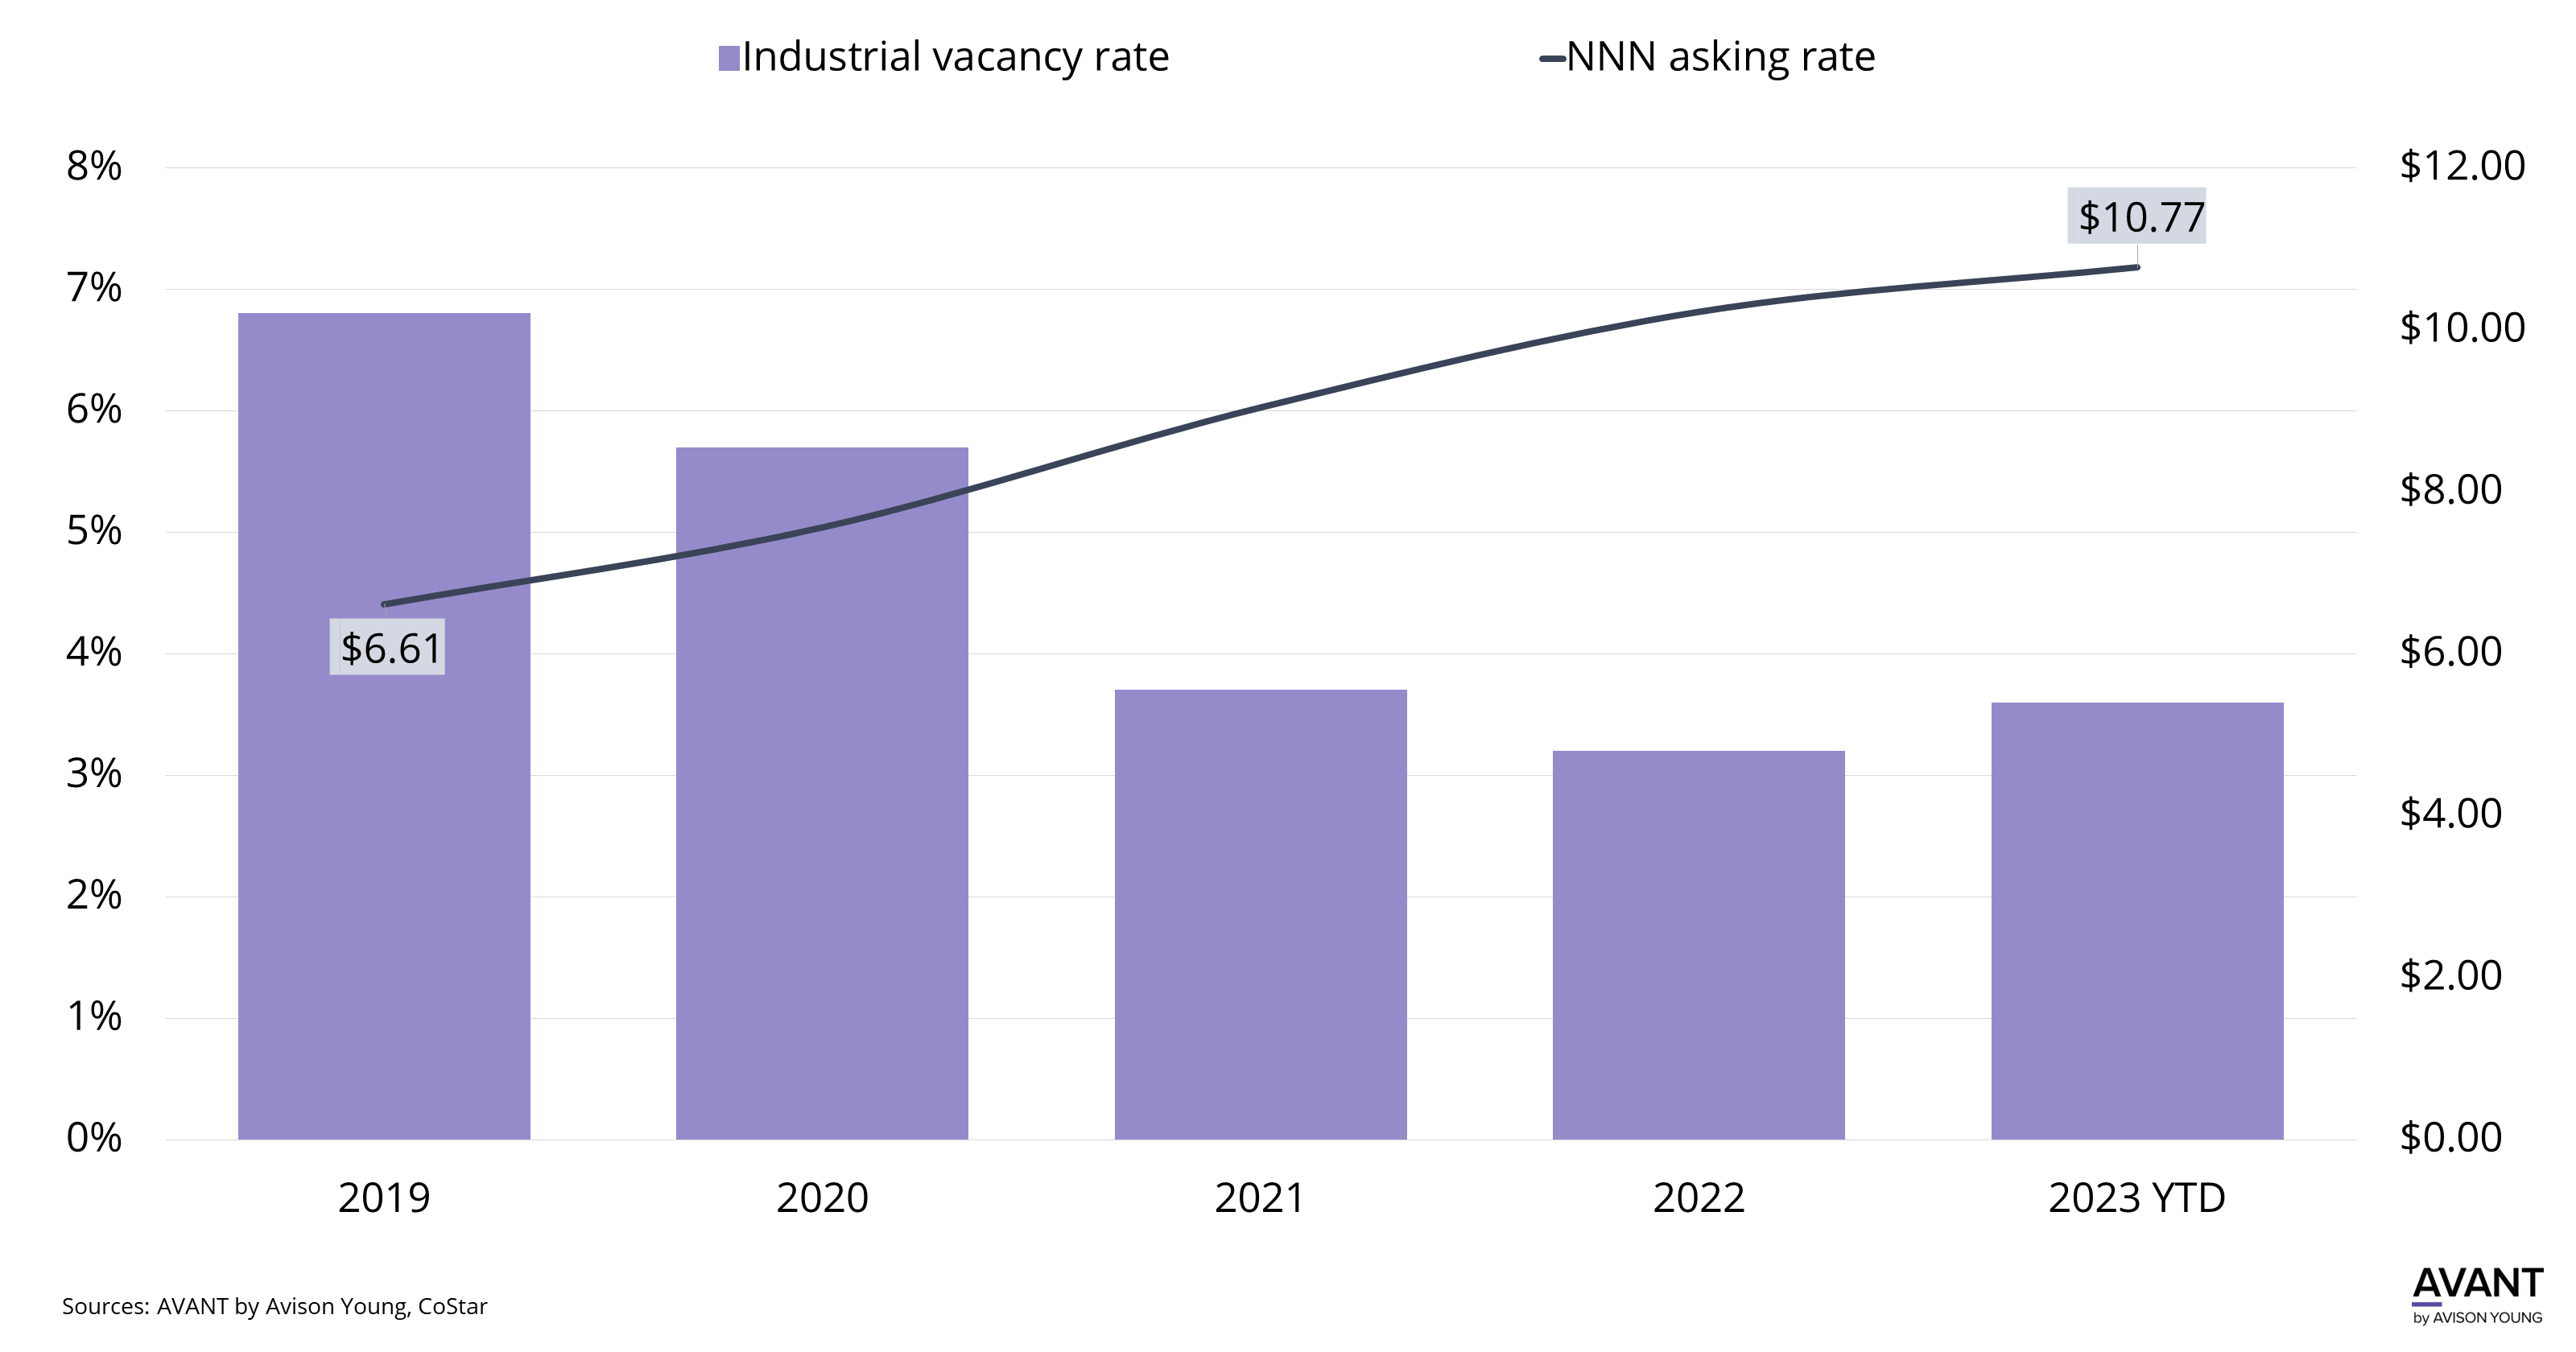 graph of Orlando's industrial vacancy rates and asking rates from 2019 to YTD 2023